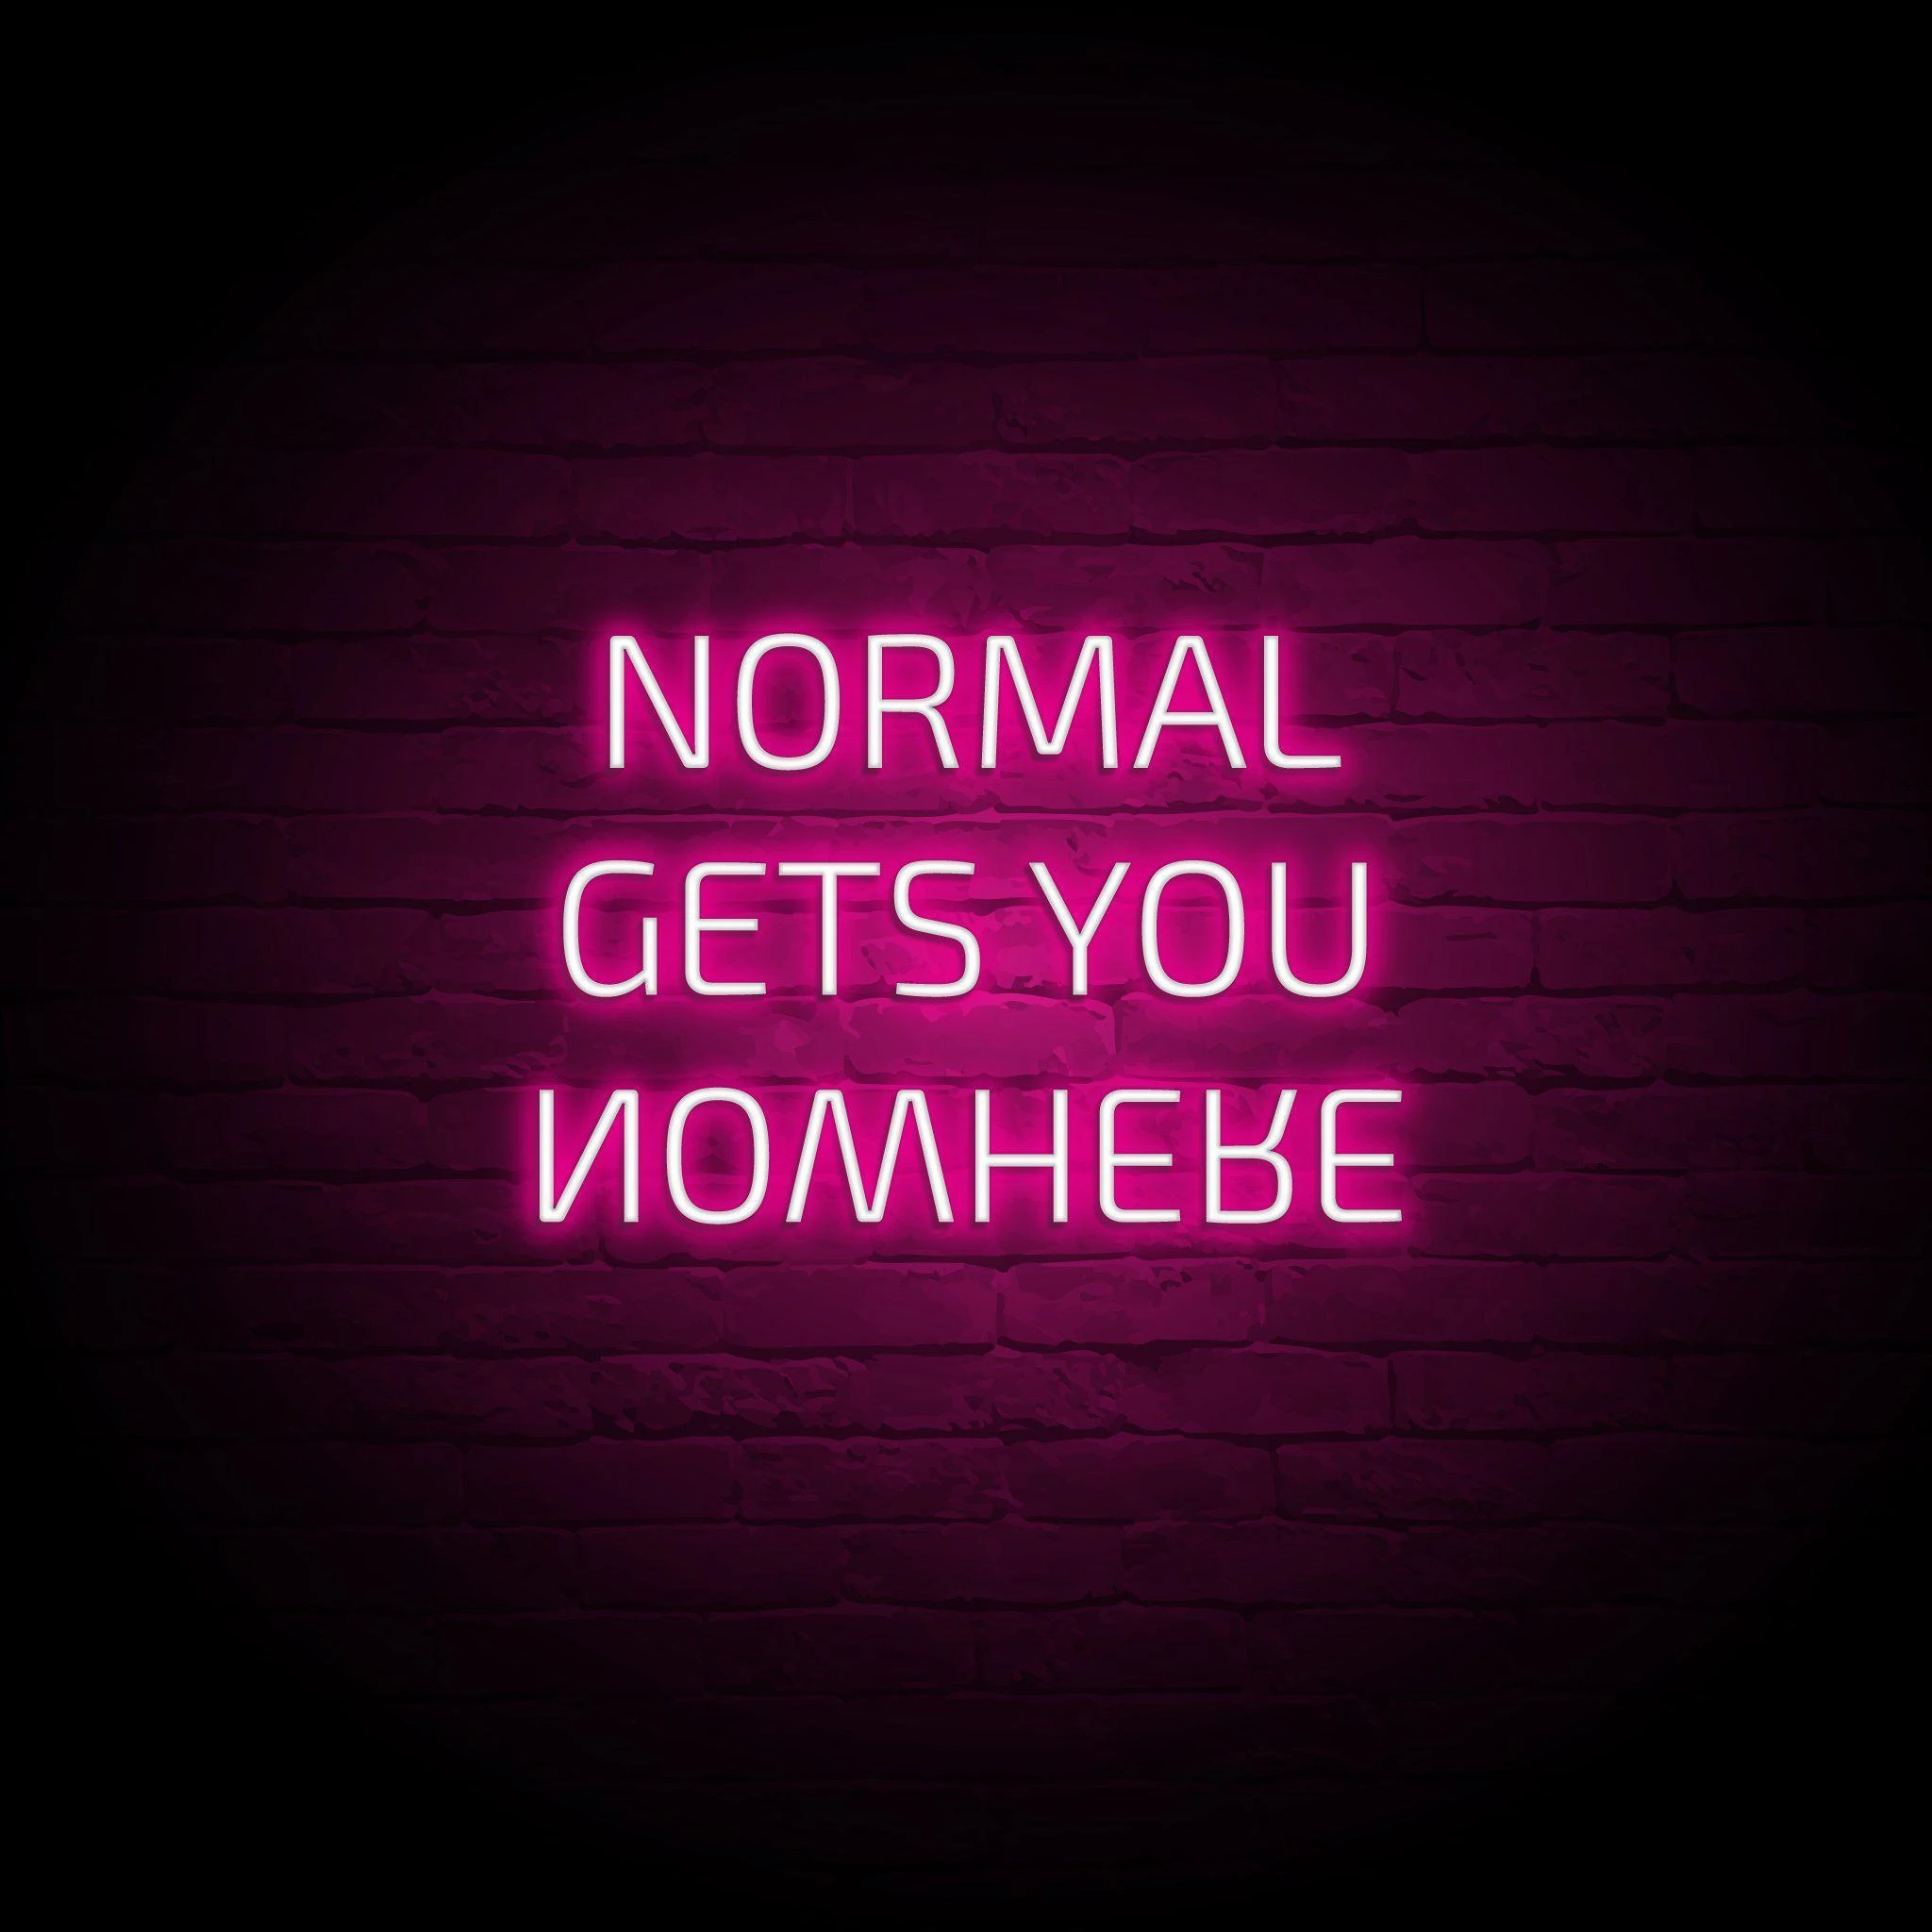 'NORMAL GETS YOU NOWHERE' NEON SIGN